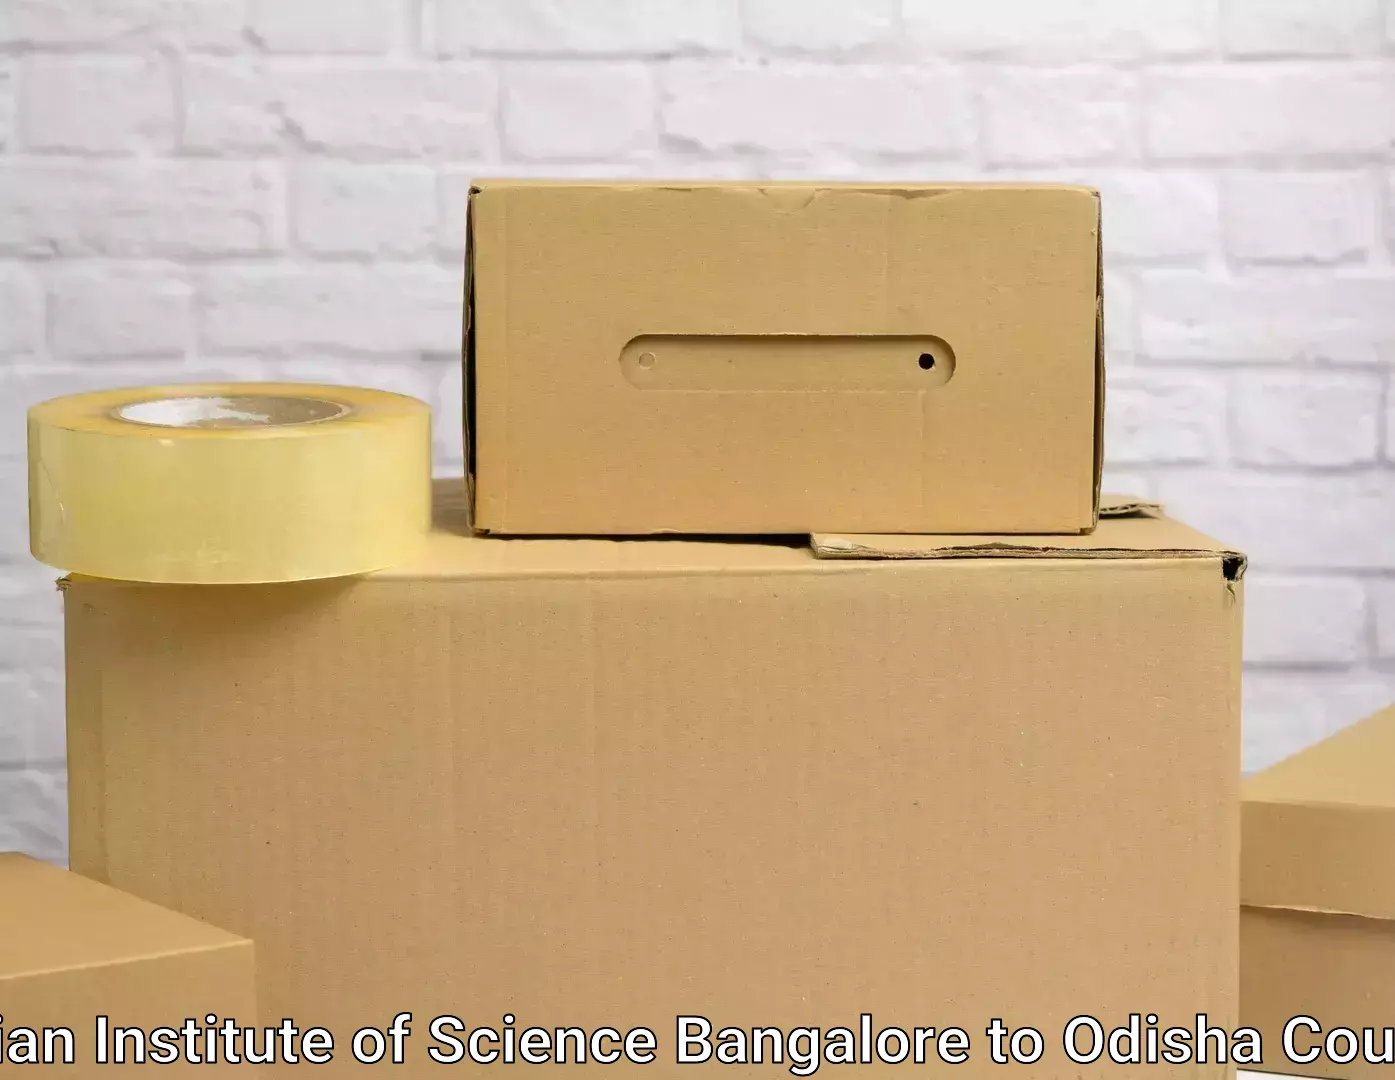 Home shifting experts Indian Institute of Science Bangalore to Odisha